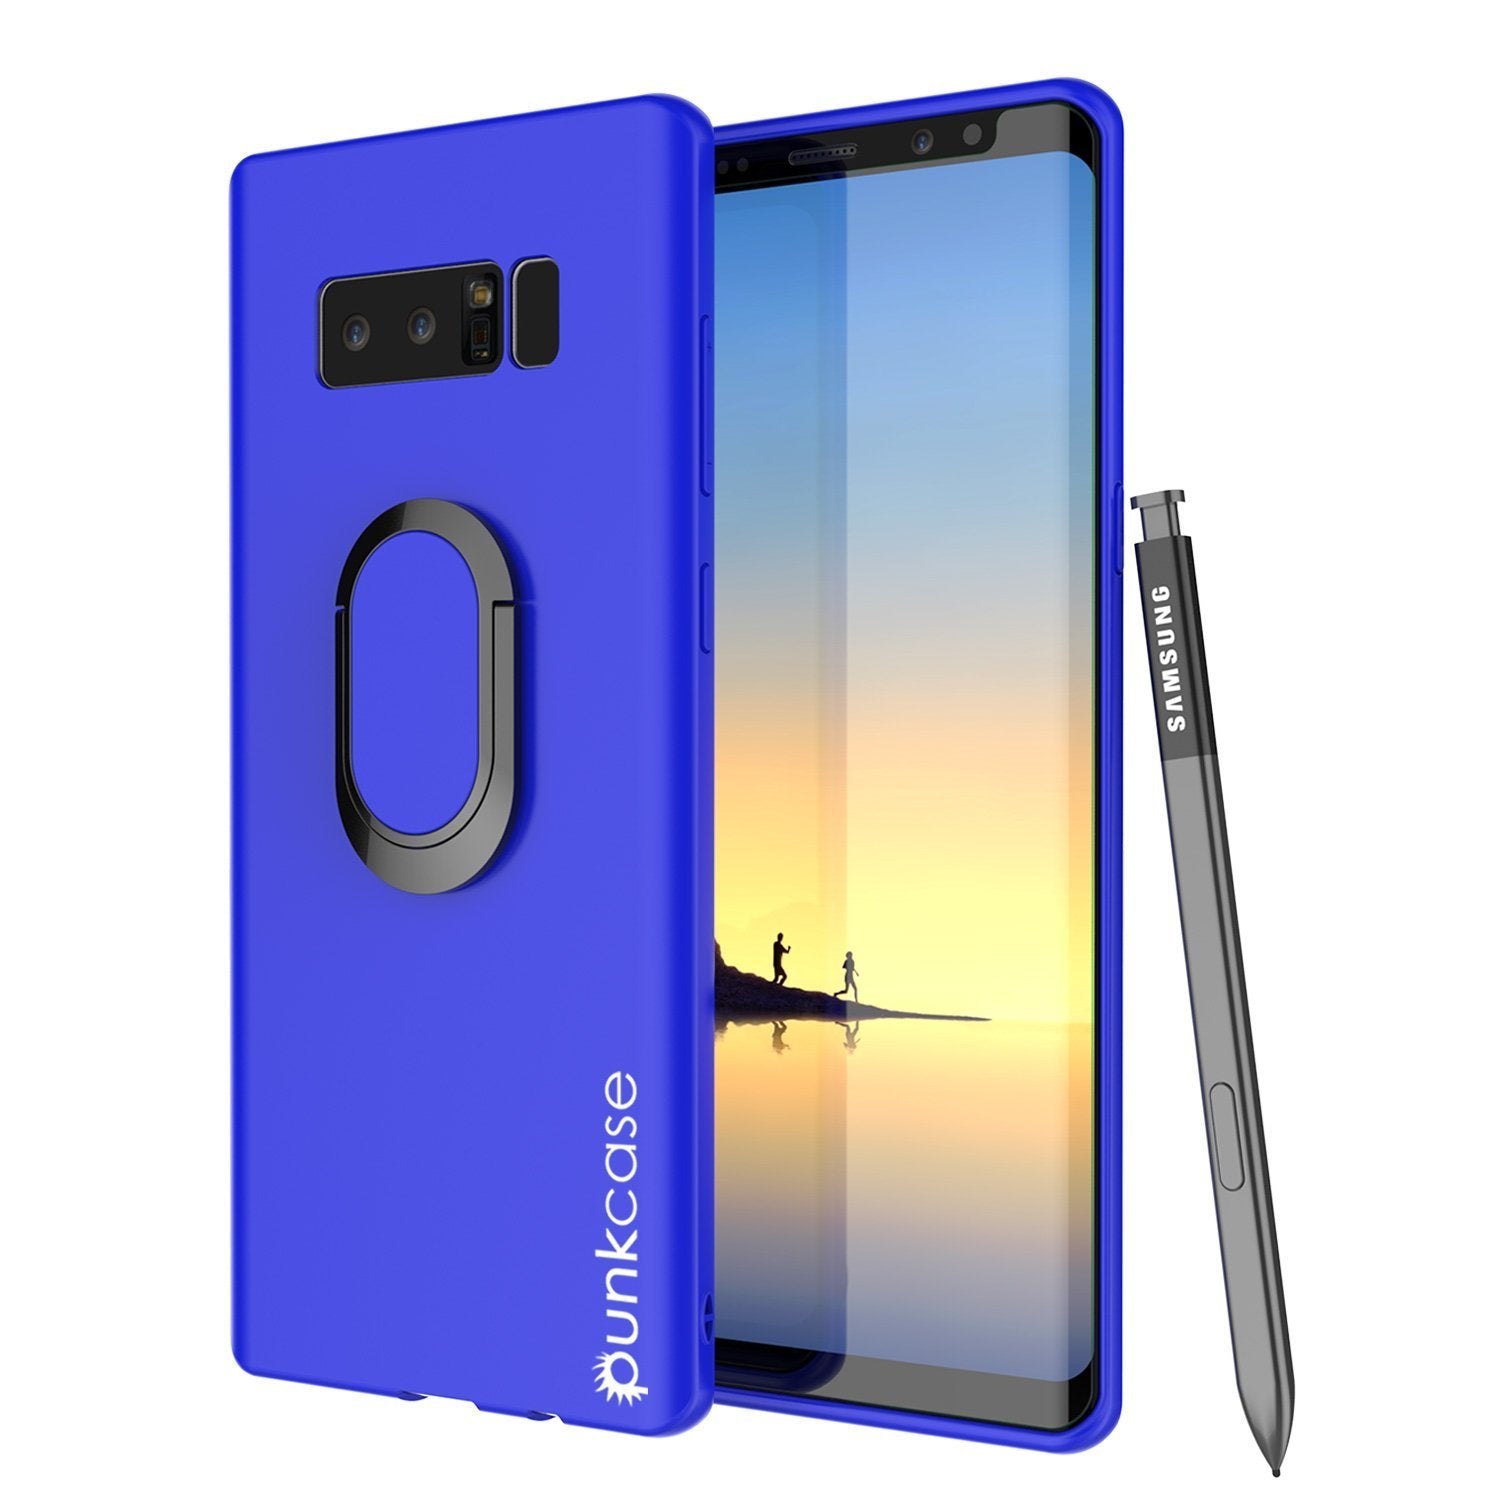 Galaxy Note 8 Case, Punkcase Magnetix Protective TPU Cover W/ Kickstand, Screen Protector [Blue]